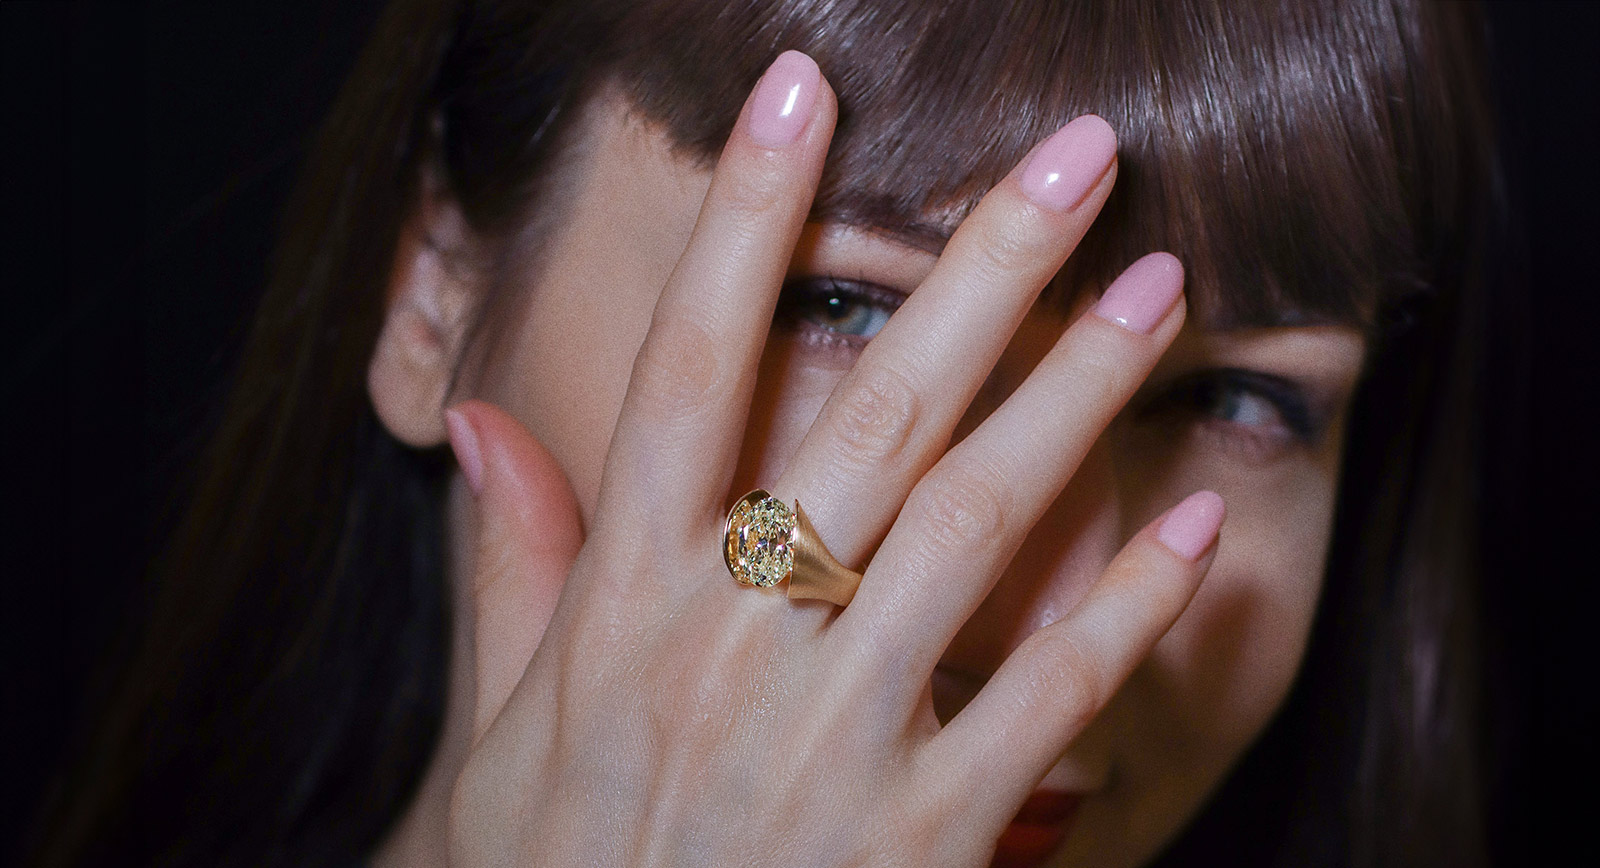  Katerina Perez wears the Schaffrath Calla Fantasie ring in 18k yellow gold with a 0.70 carat oval-cut yellow diamond